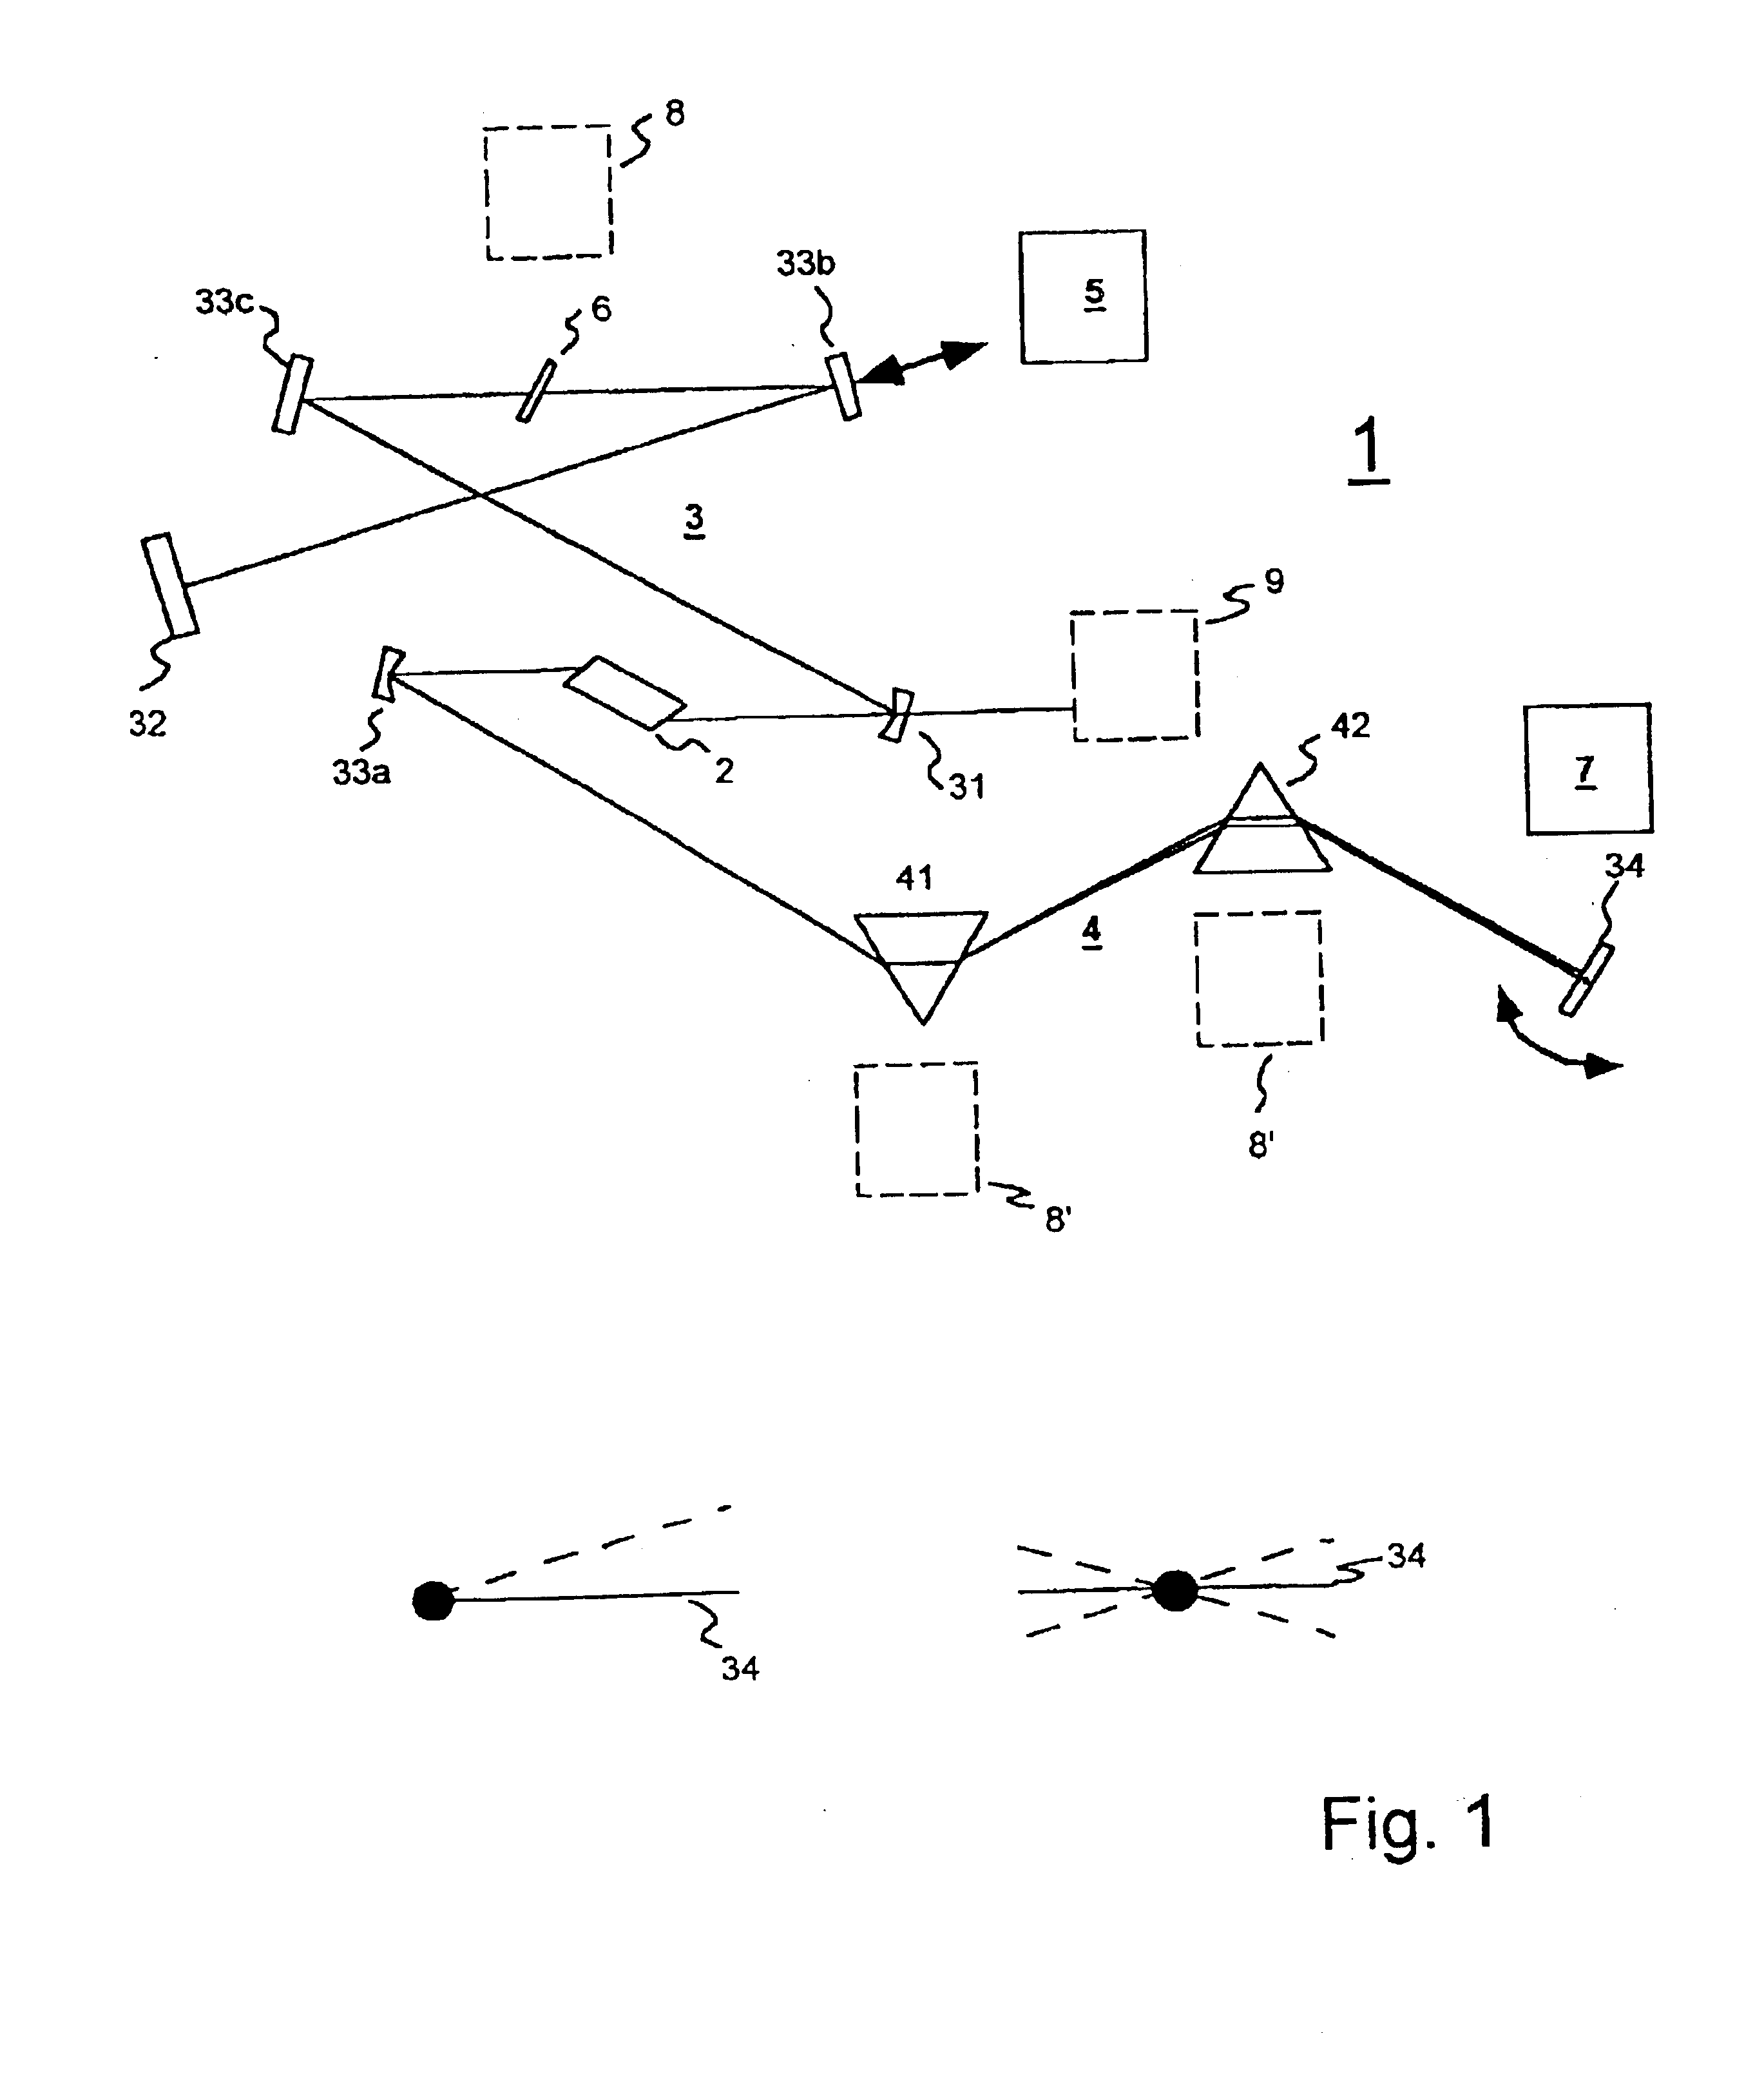 Generation of stabilized, ultra-short light pulses and the use thereof for synthesizing optical frequencies